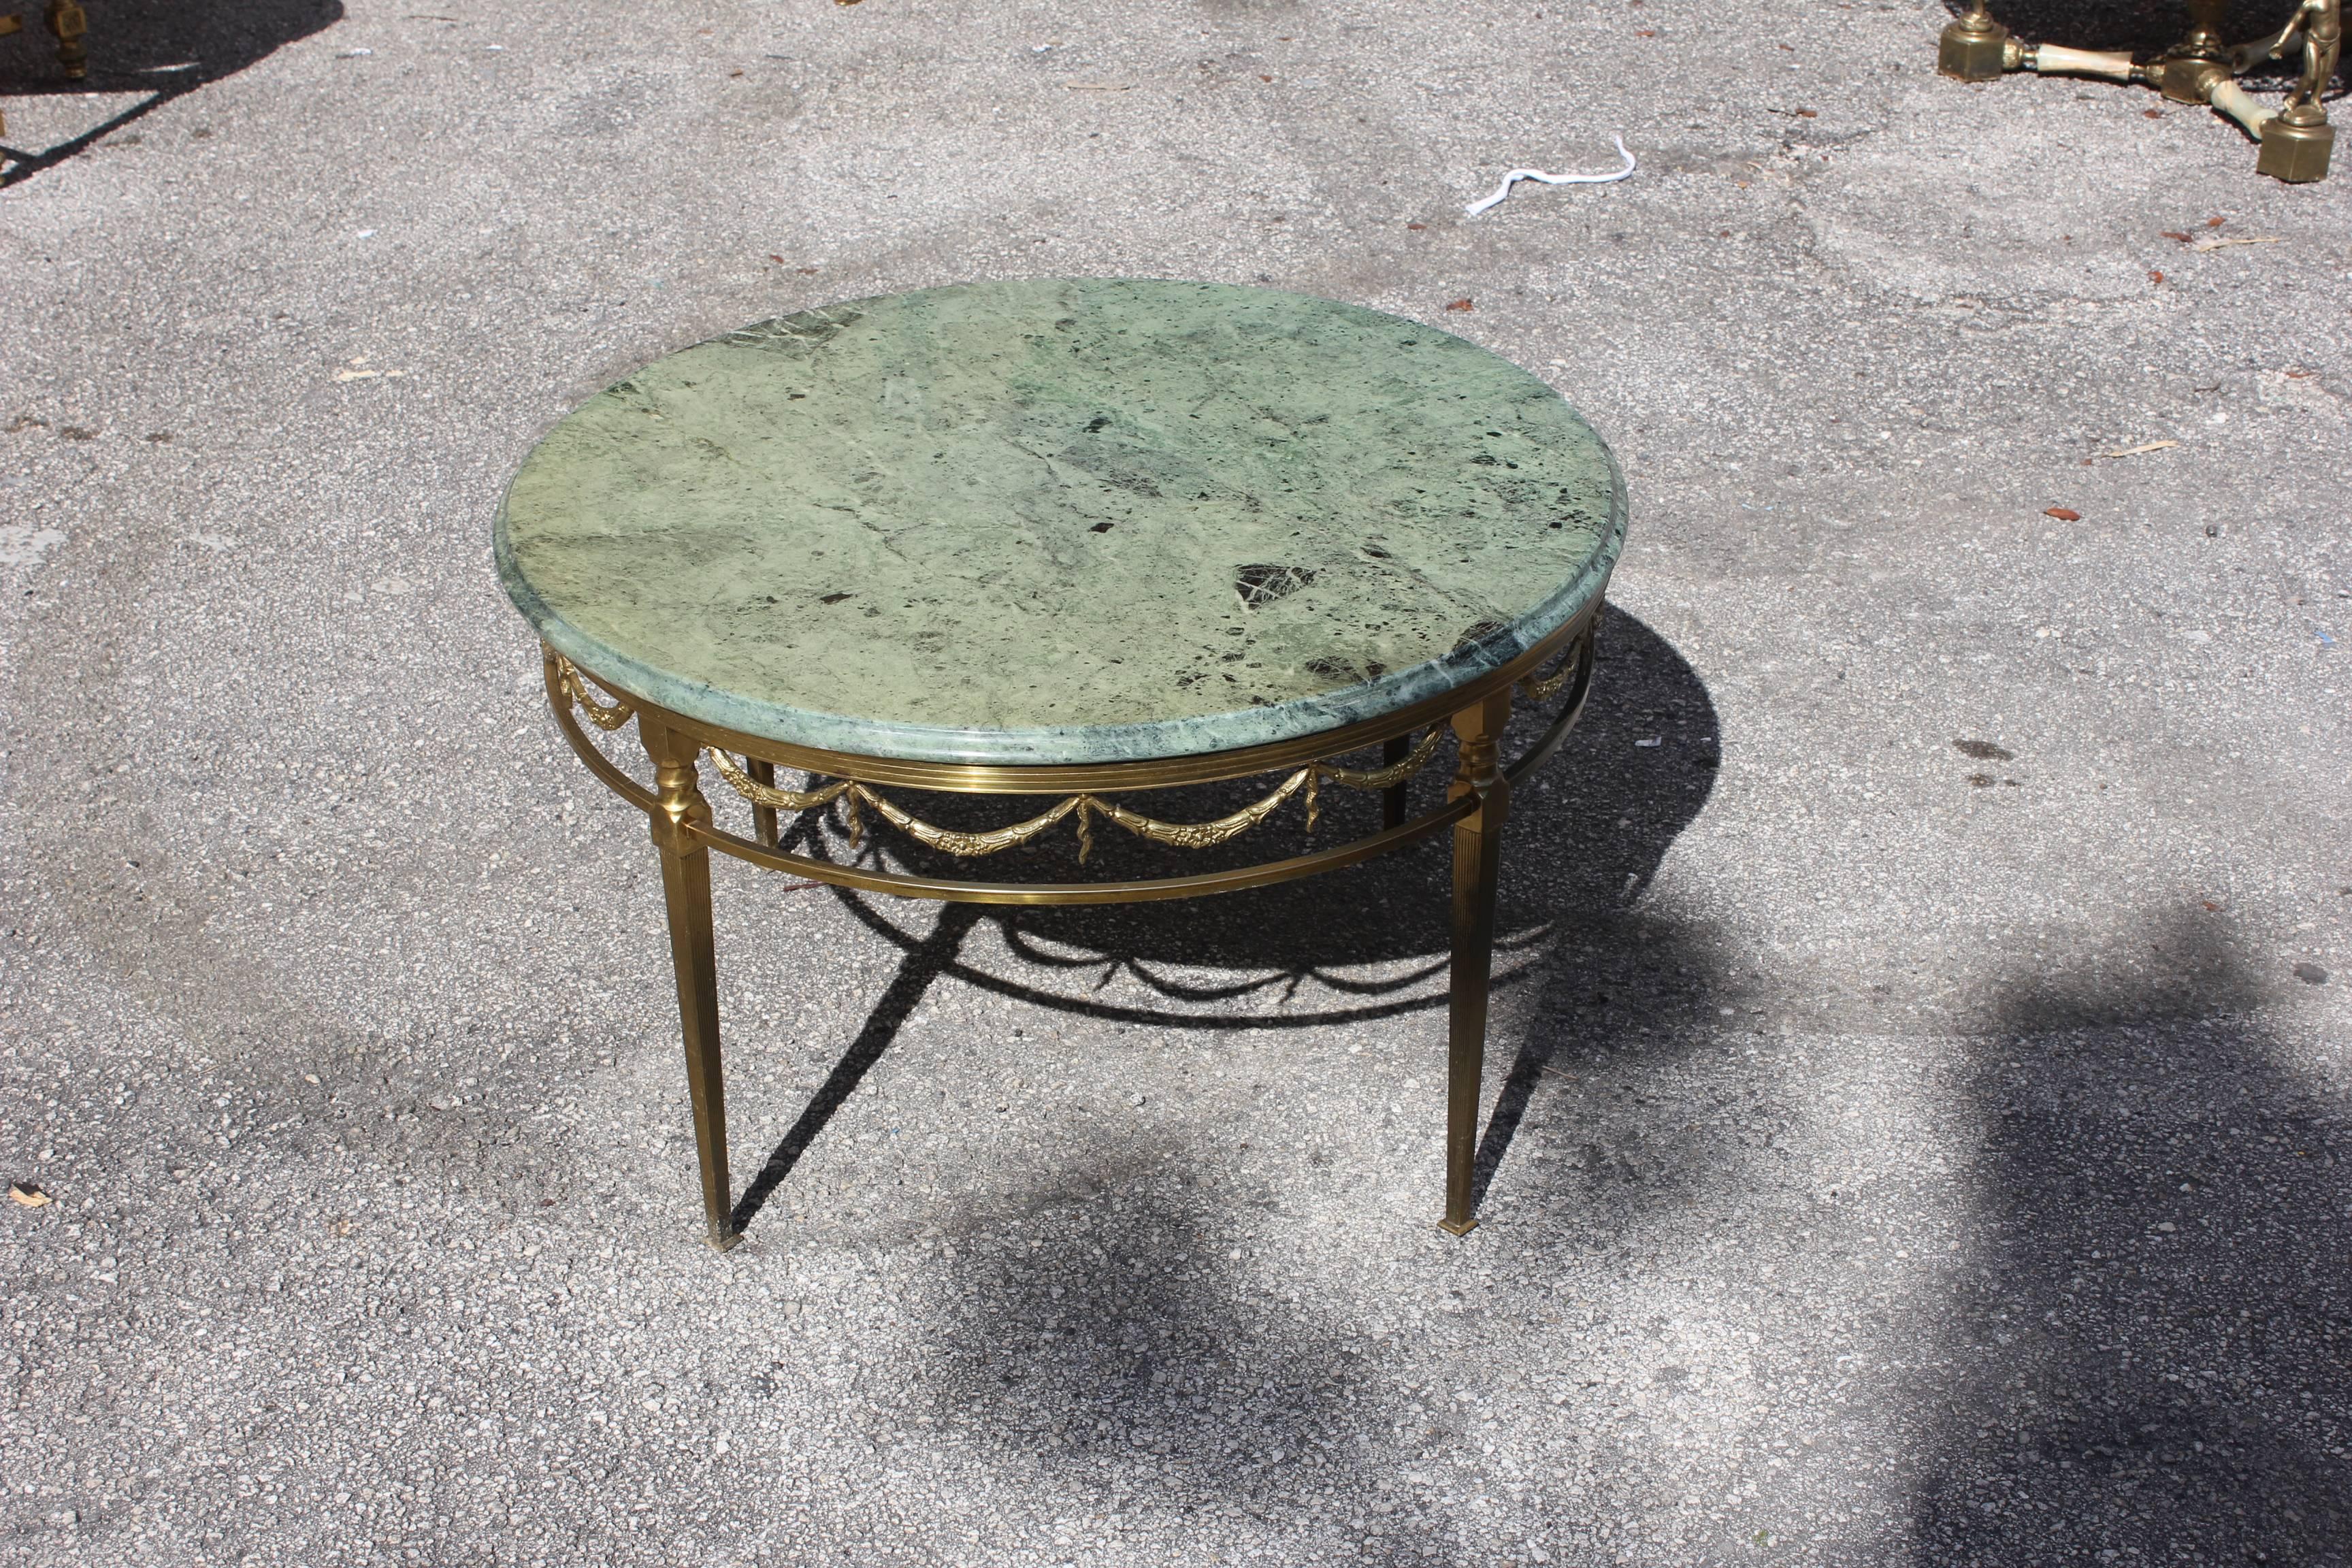 Art Deco French Maison Jansen Round Coffee Table Bronze with Marble Top, circa 1940s